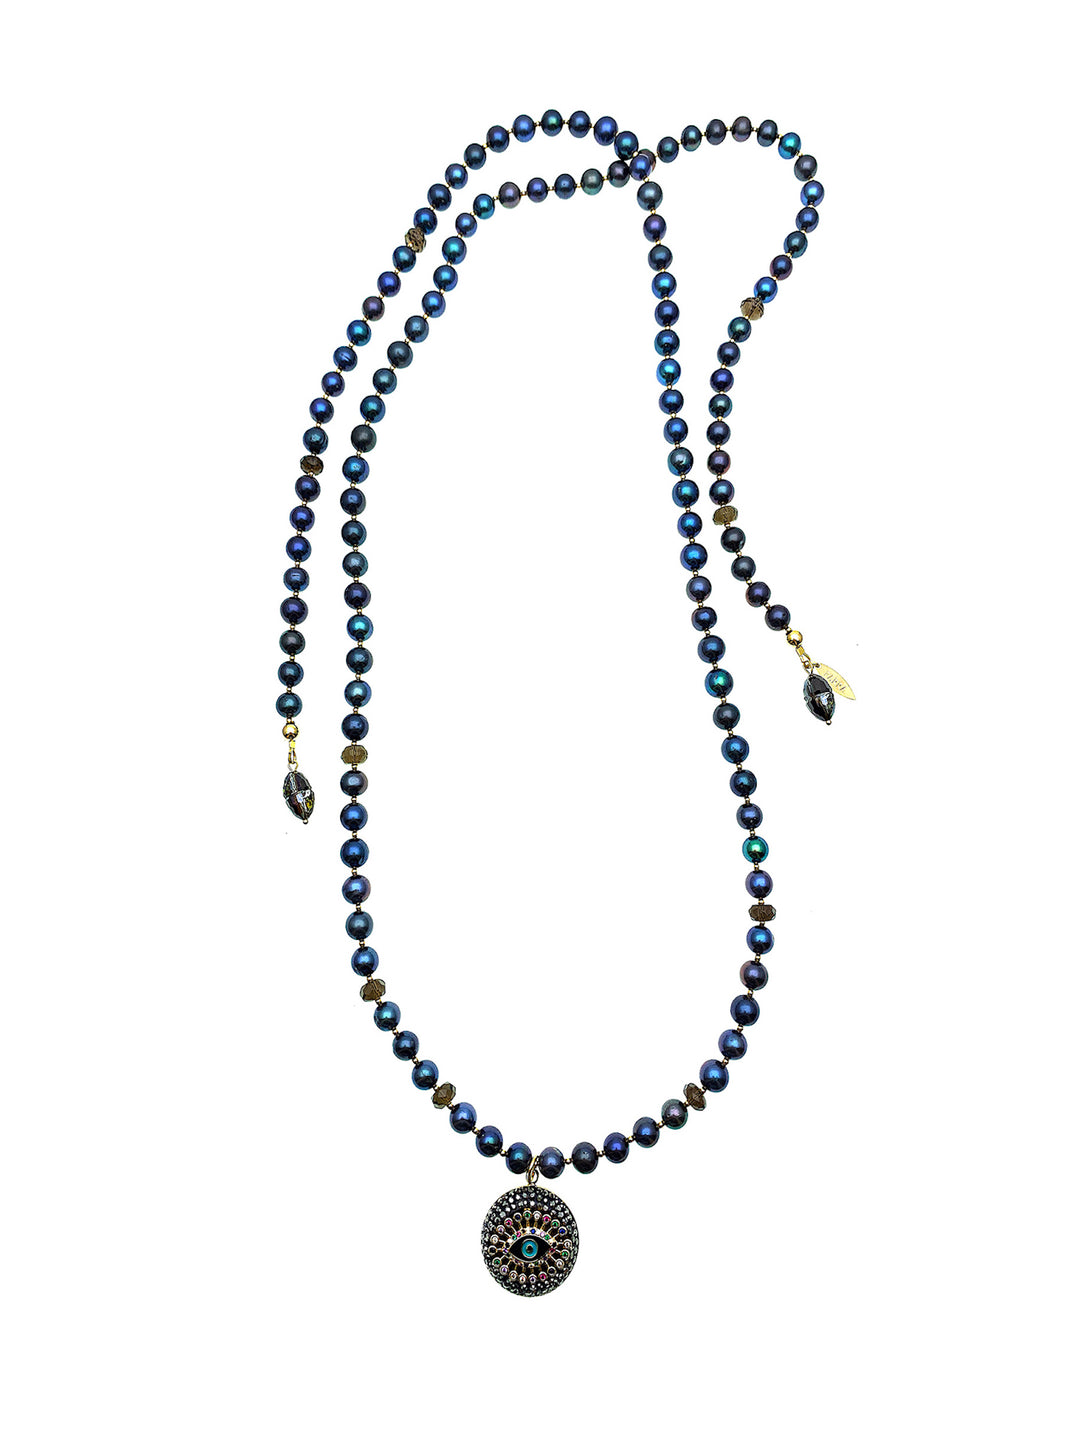 Black Pearls With Evil Eye Dangle Open Ended Necklace FN019 - FARRA